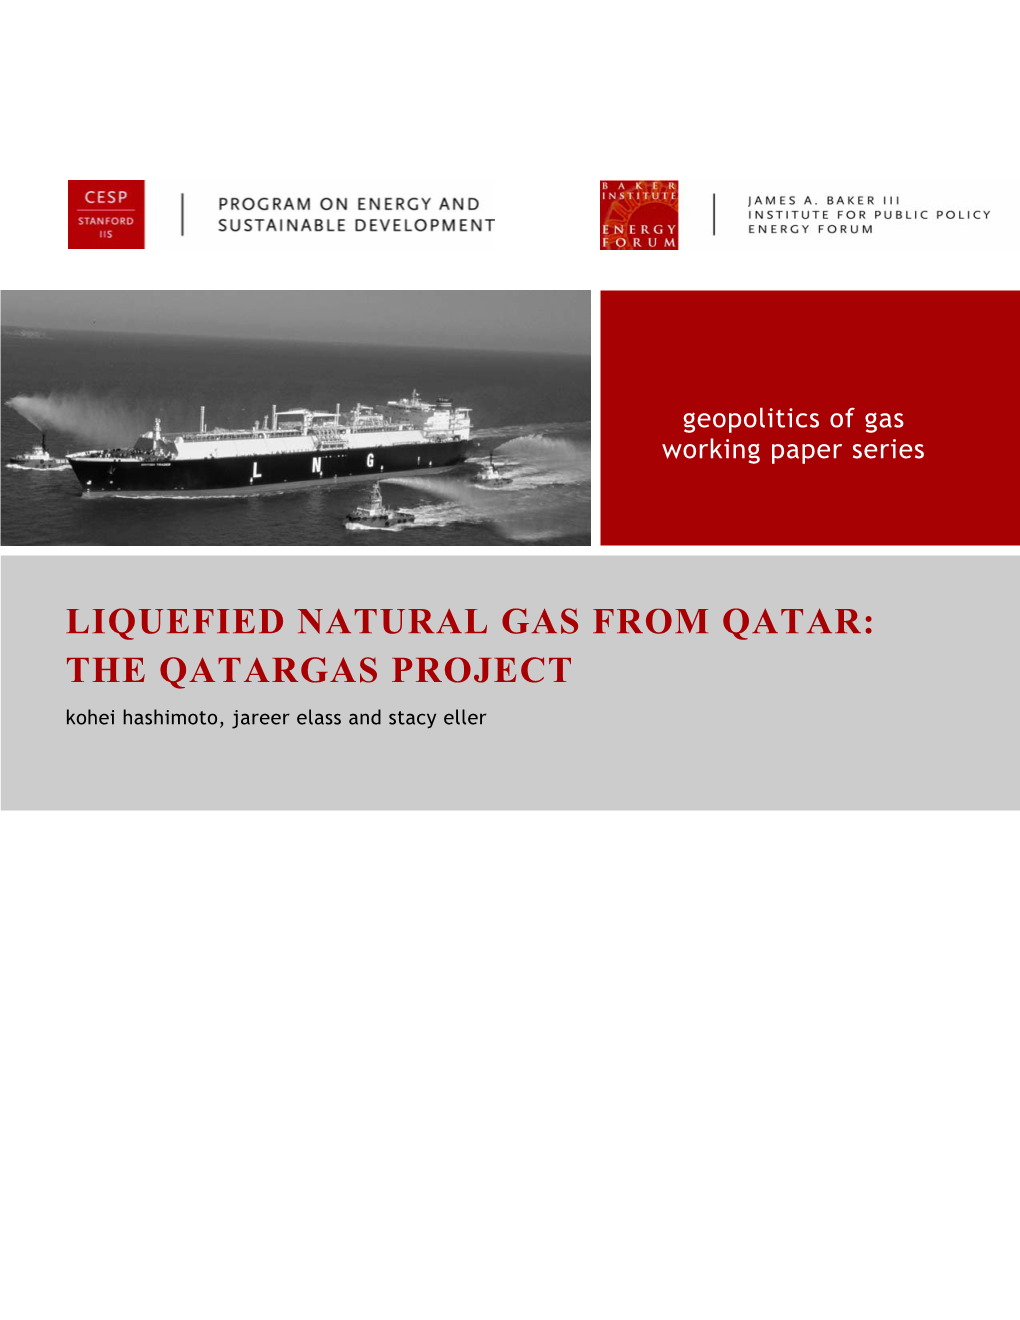 Liquefied Natural Gas from Qatar